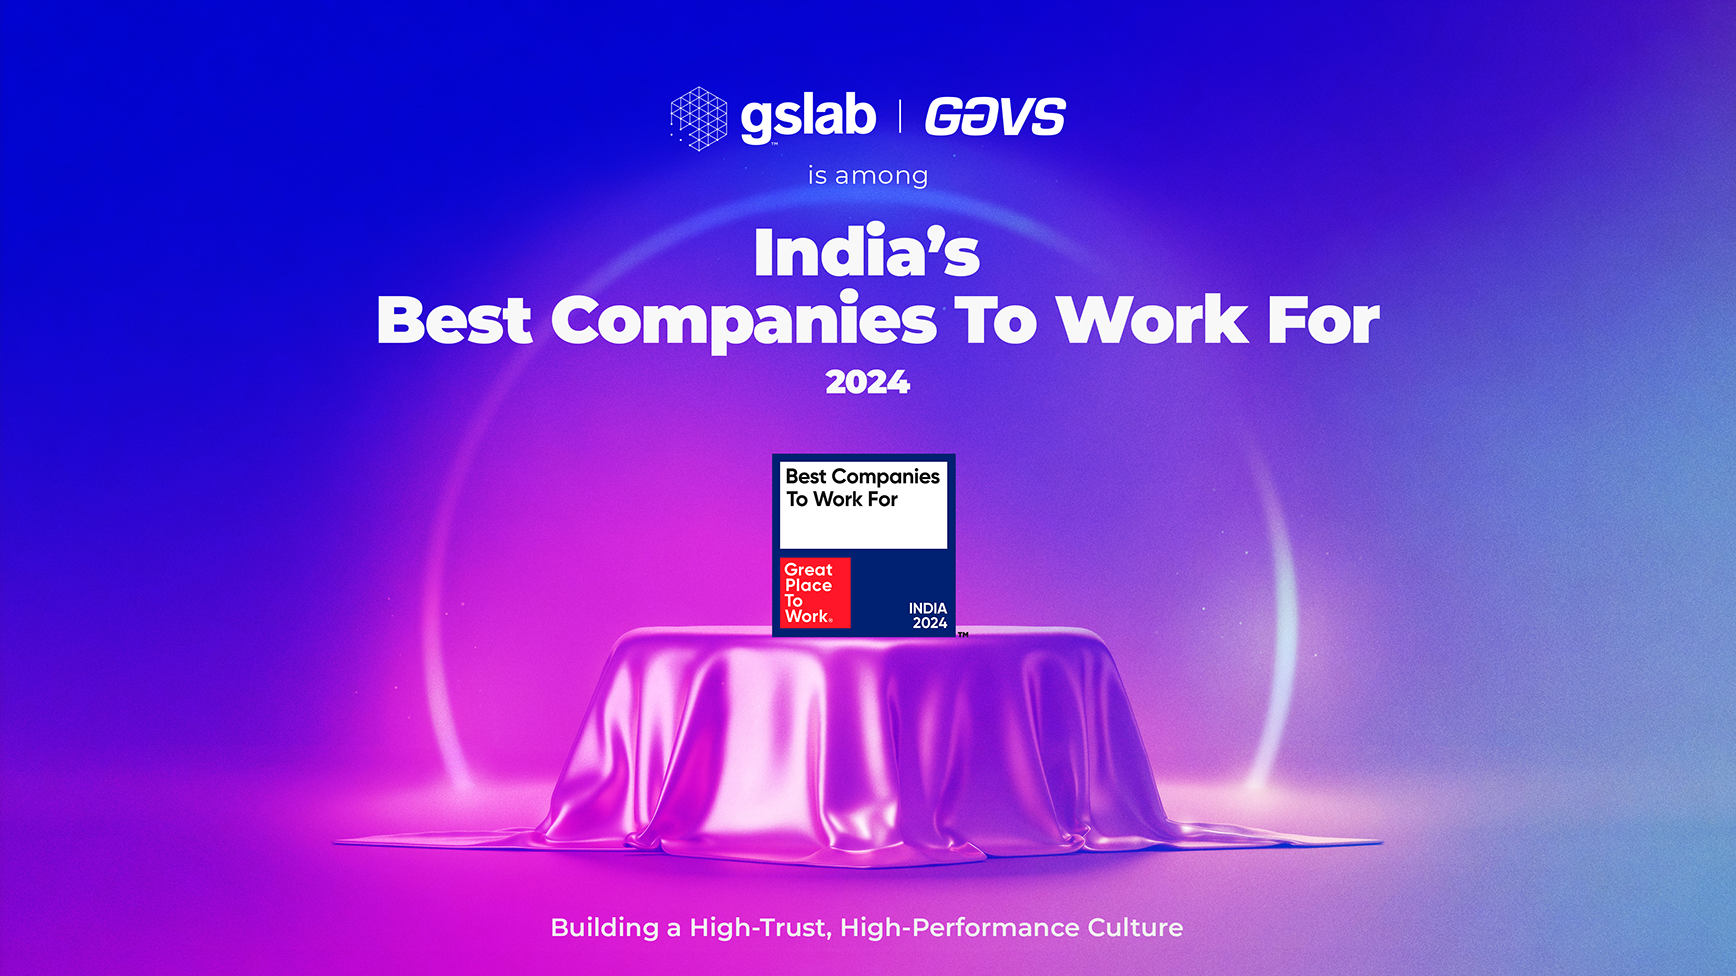 GS Lab | GAVS is one of India’s Best Companies to Work For 2024